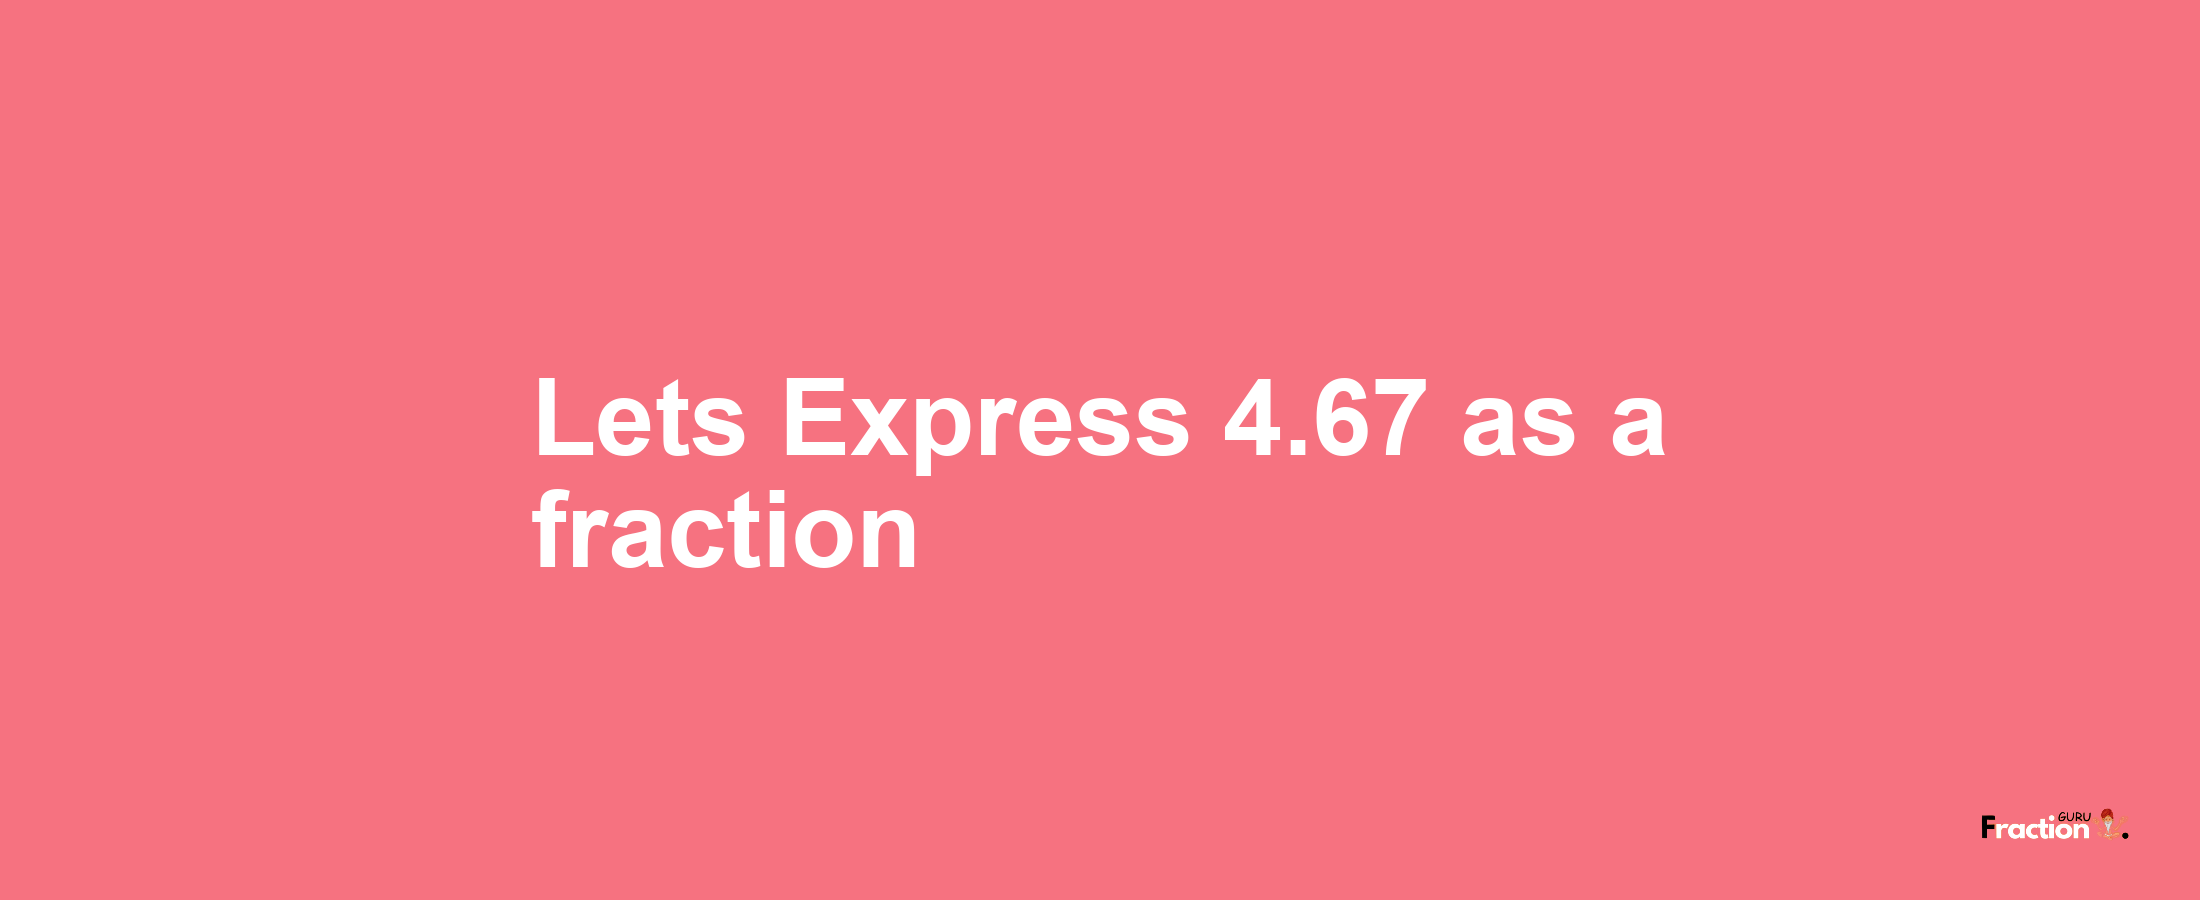 Lets Express 4.67 as afraction